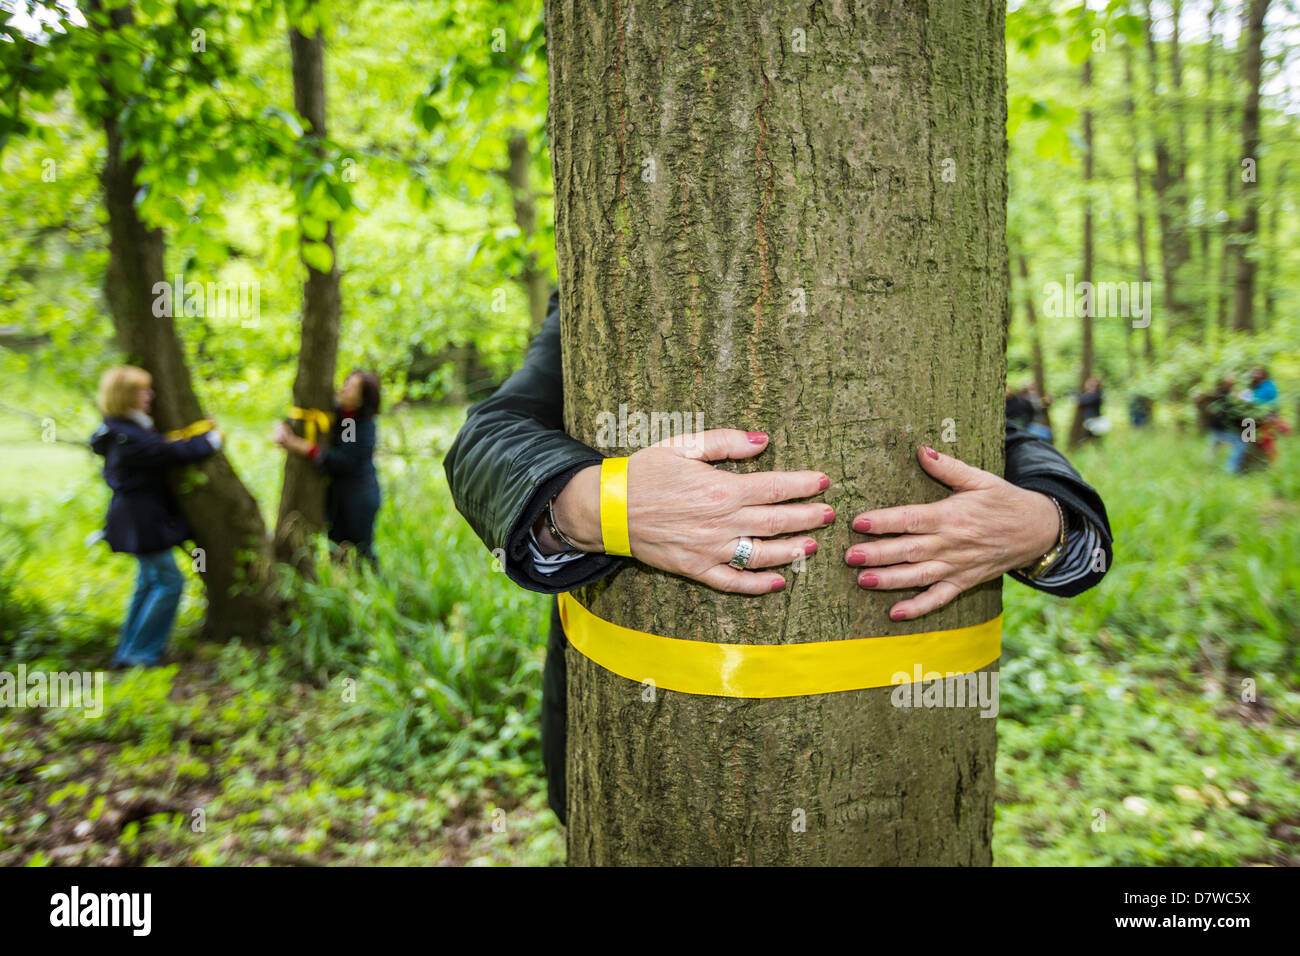 Hug a tree, world record. 848 people hugging a tree at same time. World record for Guinness book of records. initiated by WWF. Stock Photo